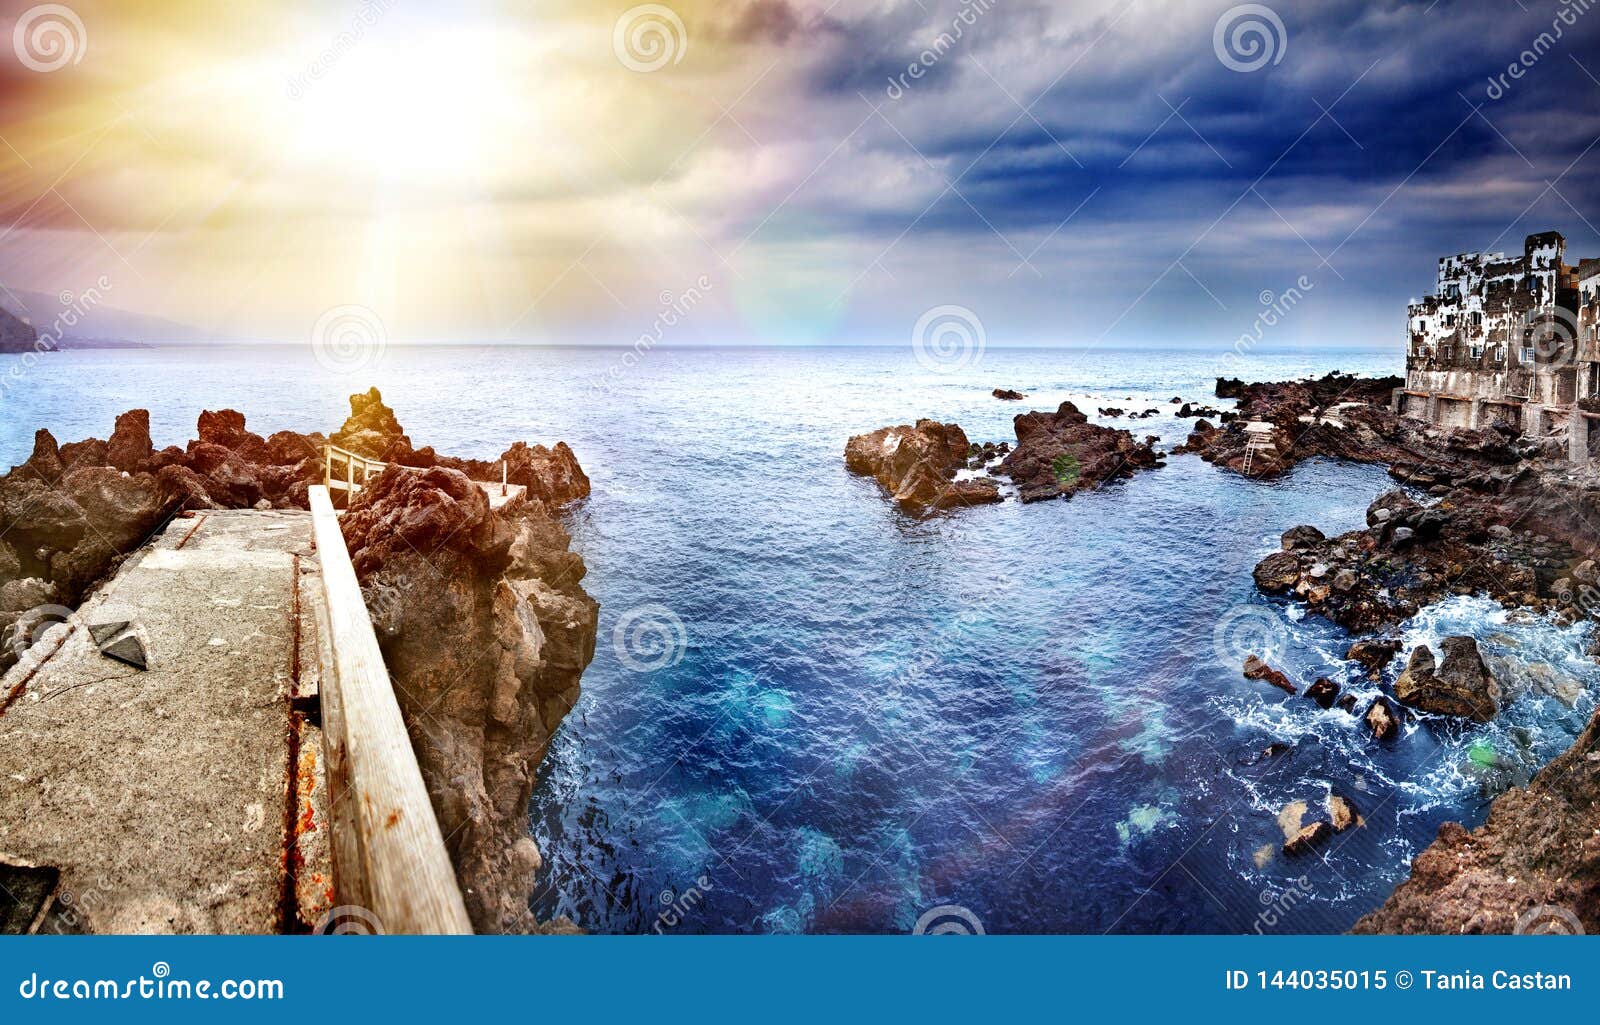 perspective view of a stone pier in the sea. seascape background in the ocean. travel and vacation concept. tenerife,